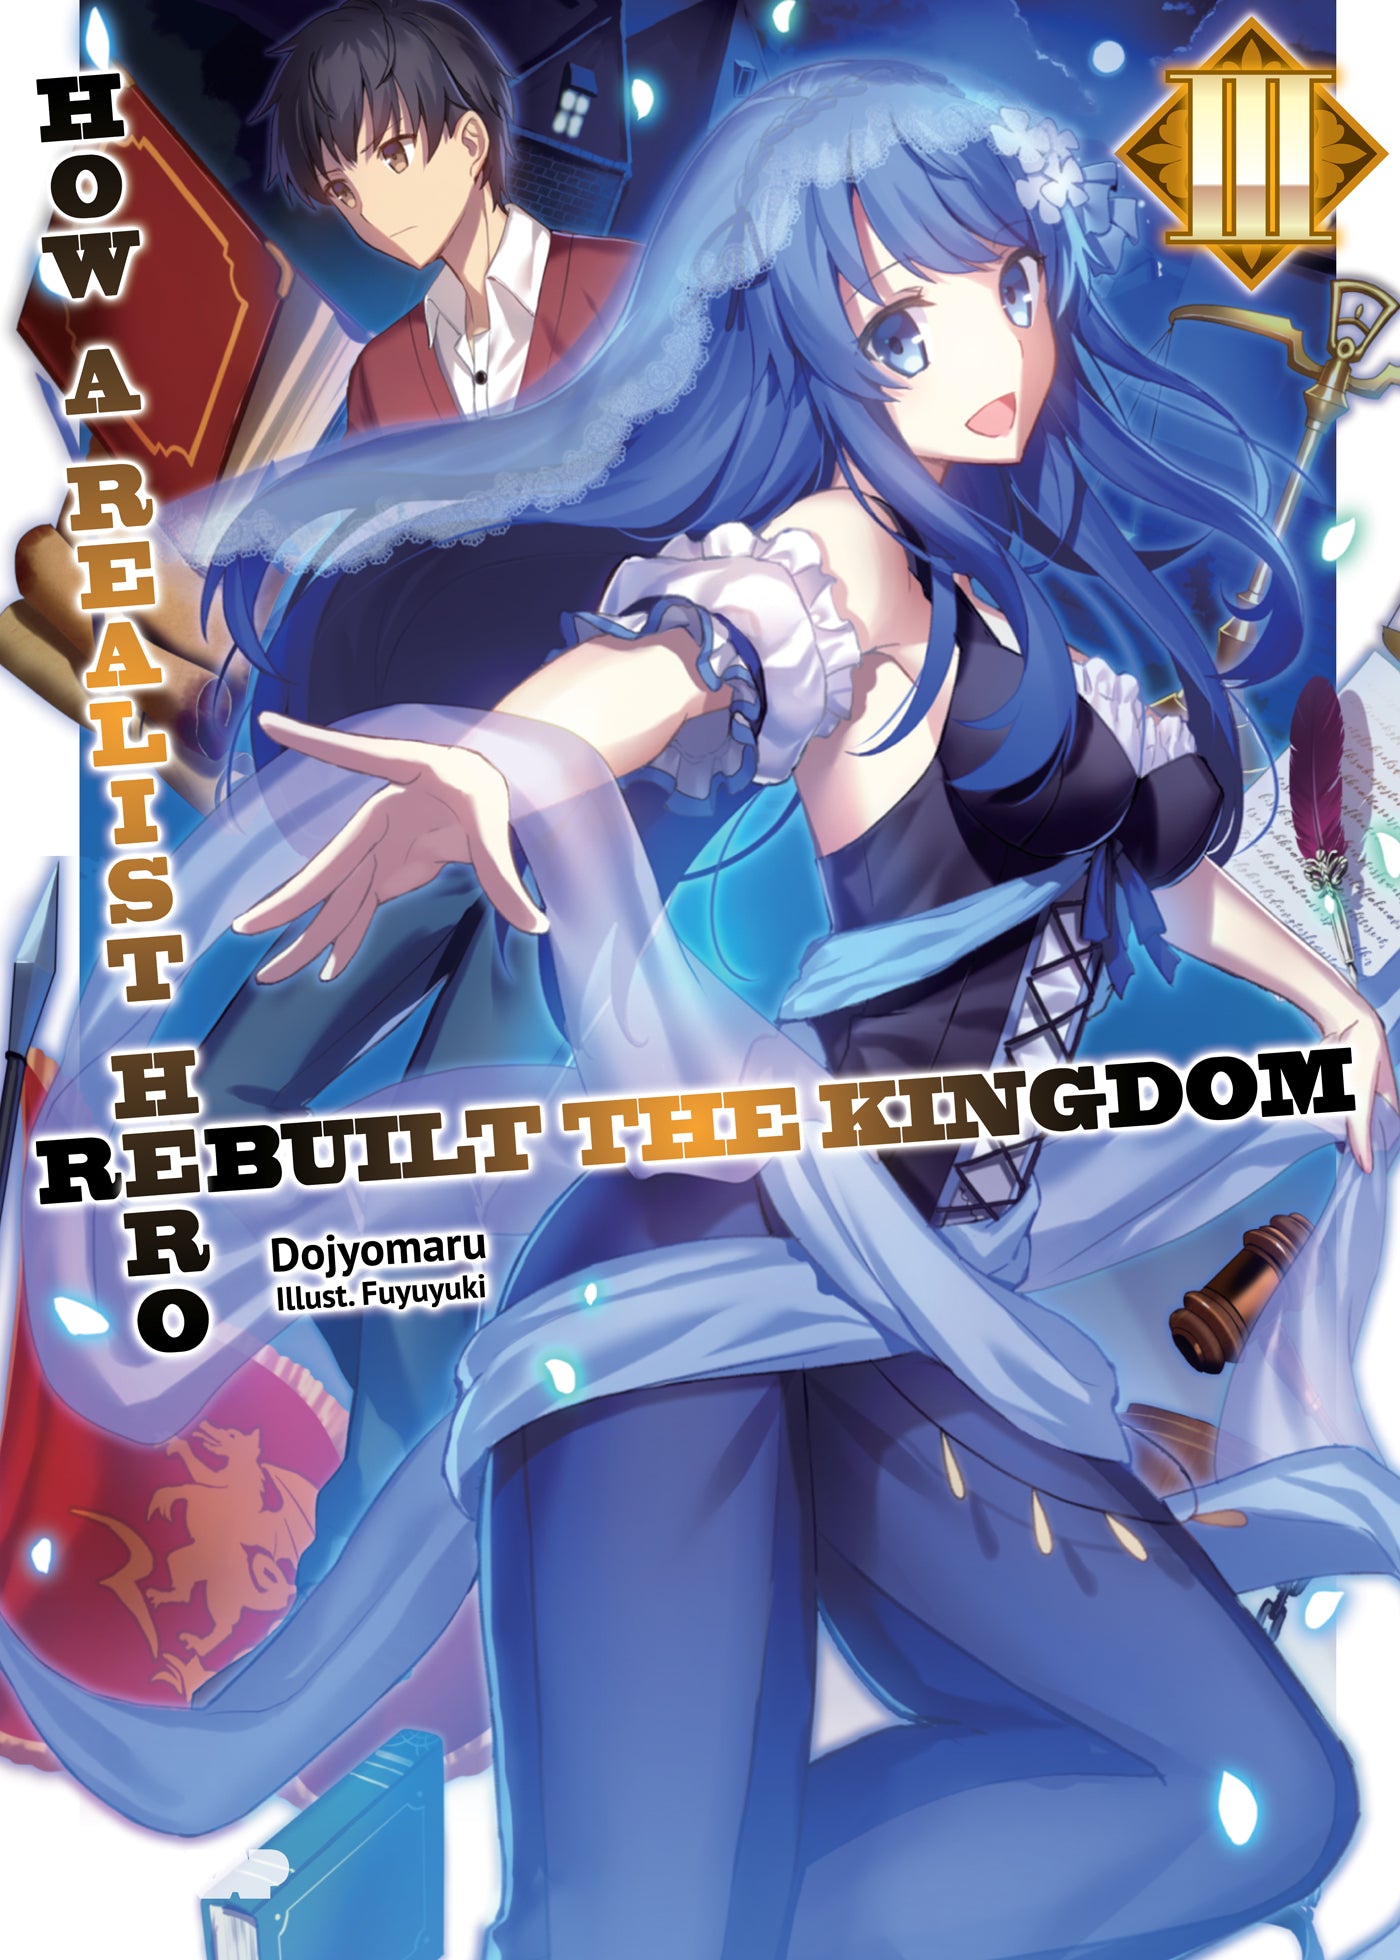 How a Realist Hero Rebuilt the Kingdom (Light Novel) Vol. 03 (Out of Stock Indefinitely)